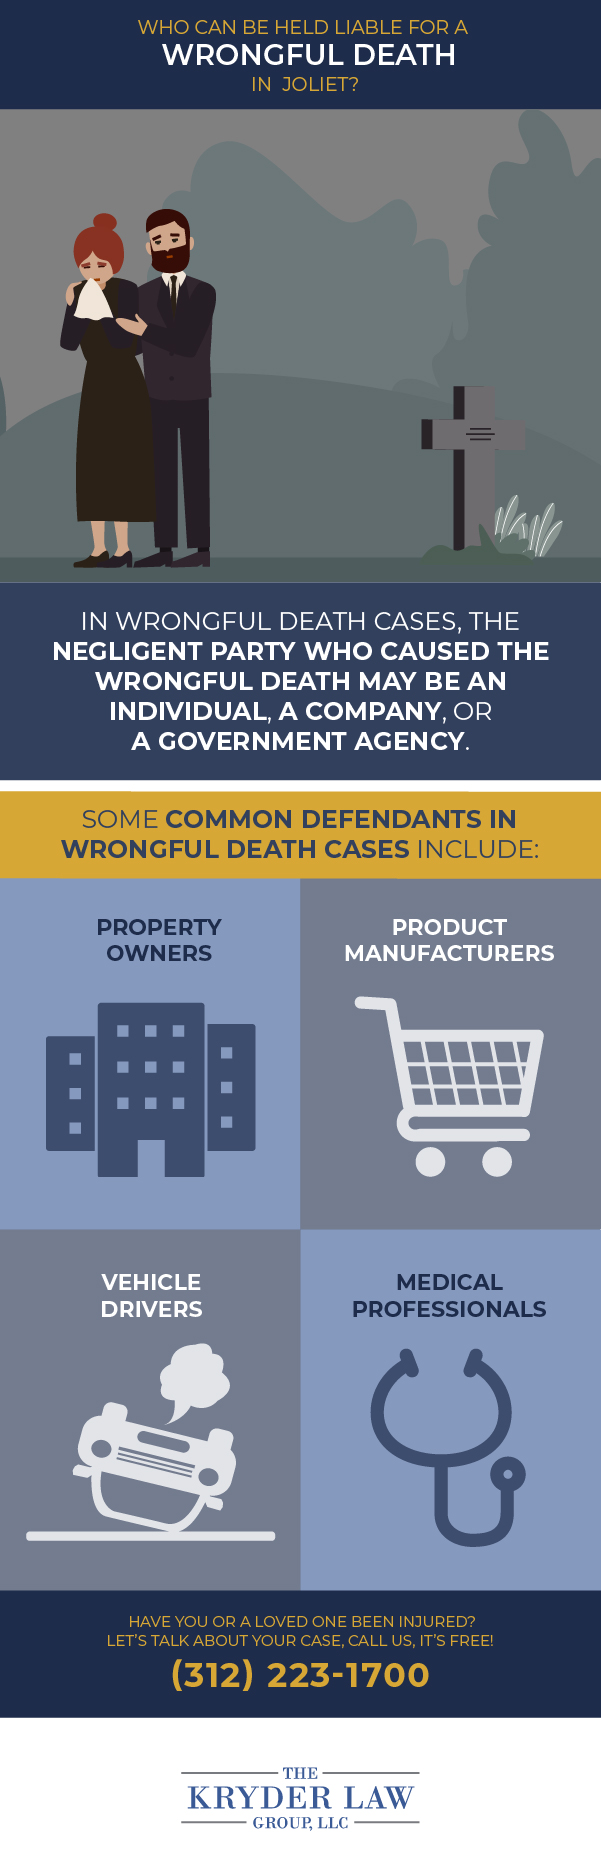 Who Can Be Held Liable for a Wrongful Death in Joliet?